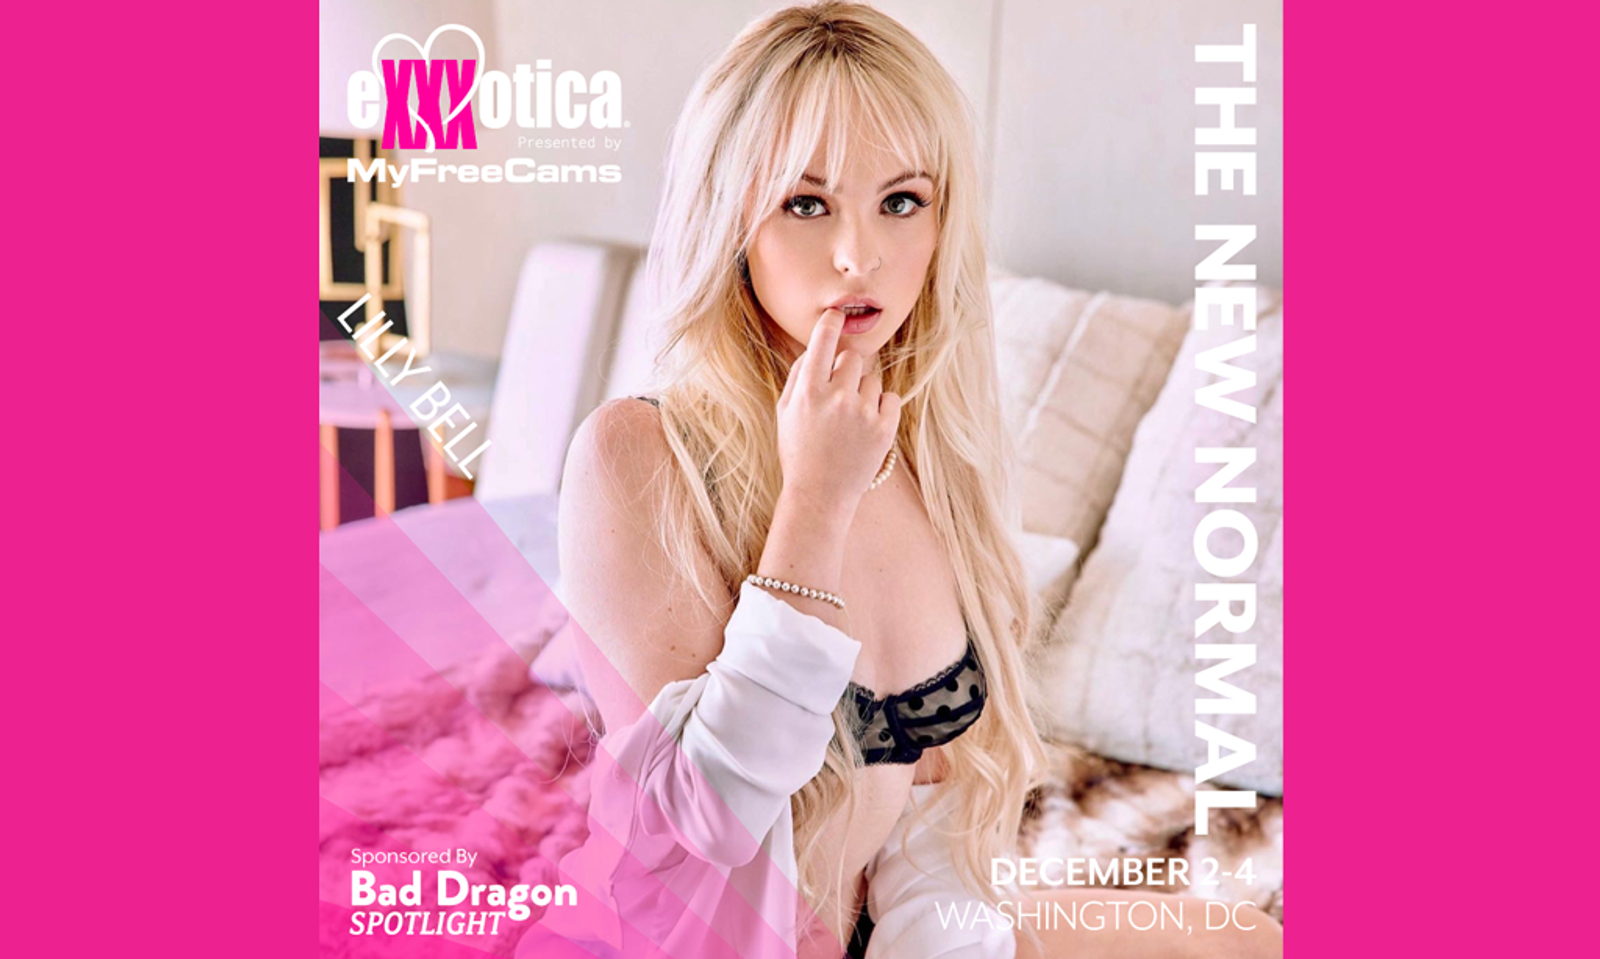 Lilly Bell to Appear at Last Exxxotica of 2022